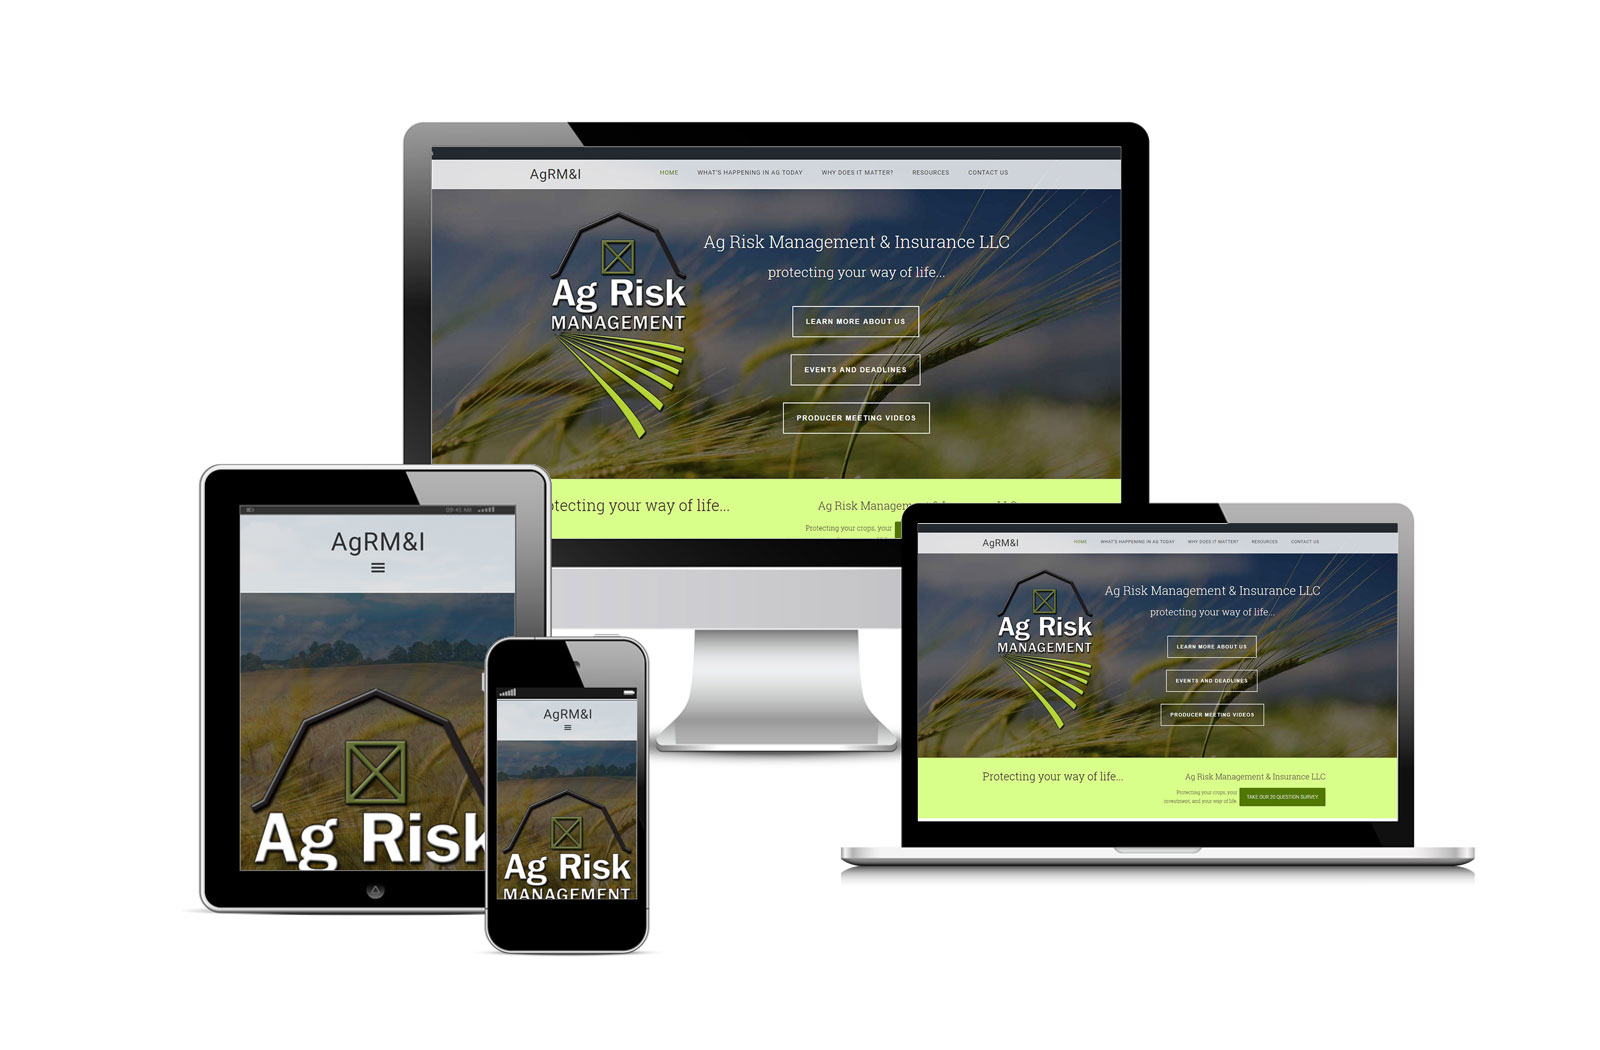 Ag Risk Managment and Insurance Official Website Designed By Eric Alexander and Striped Ape Digital Media